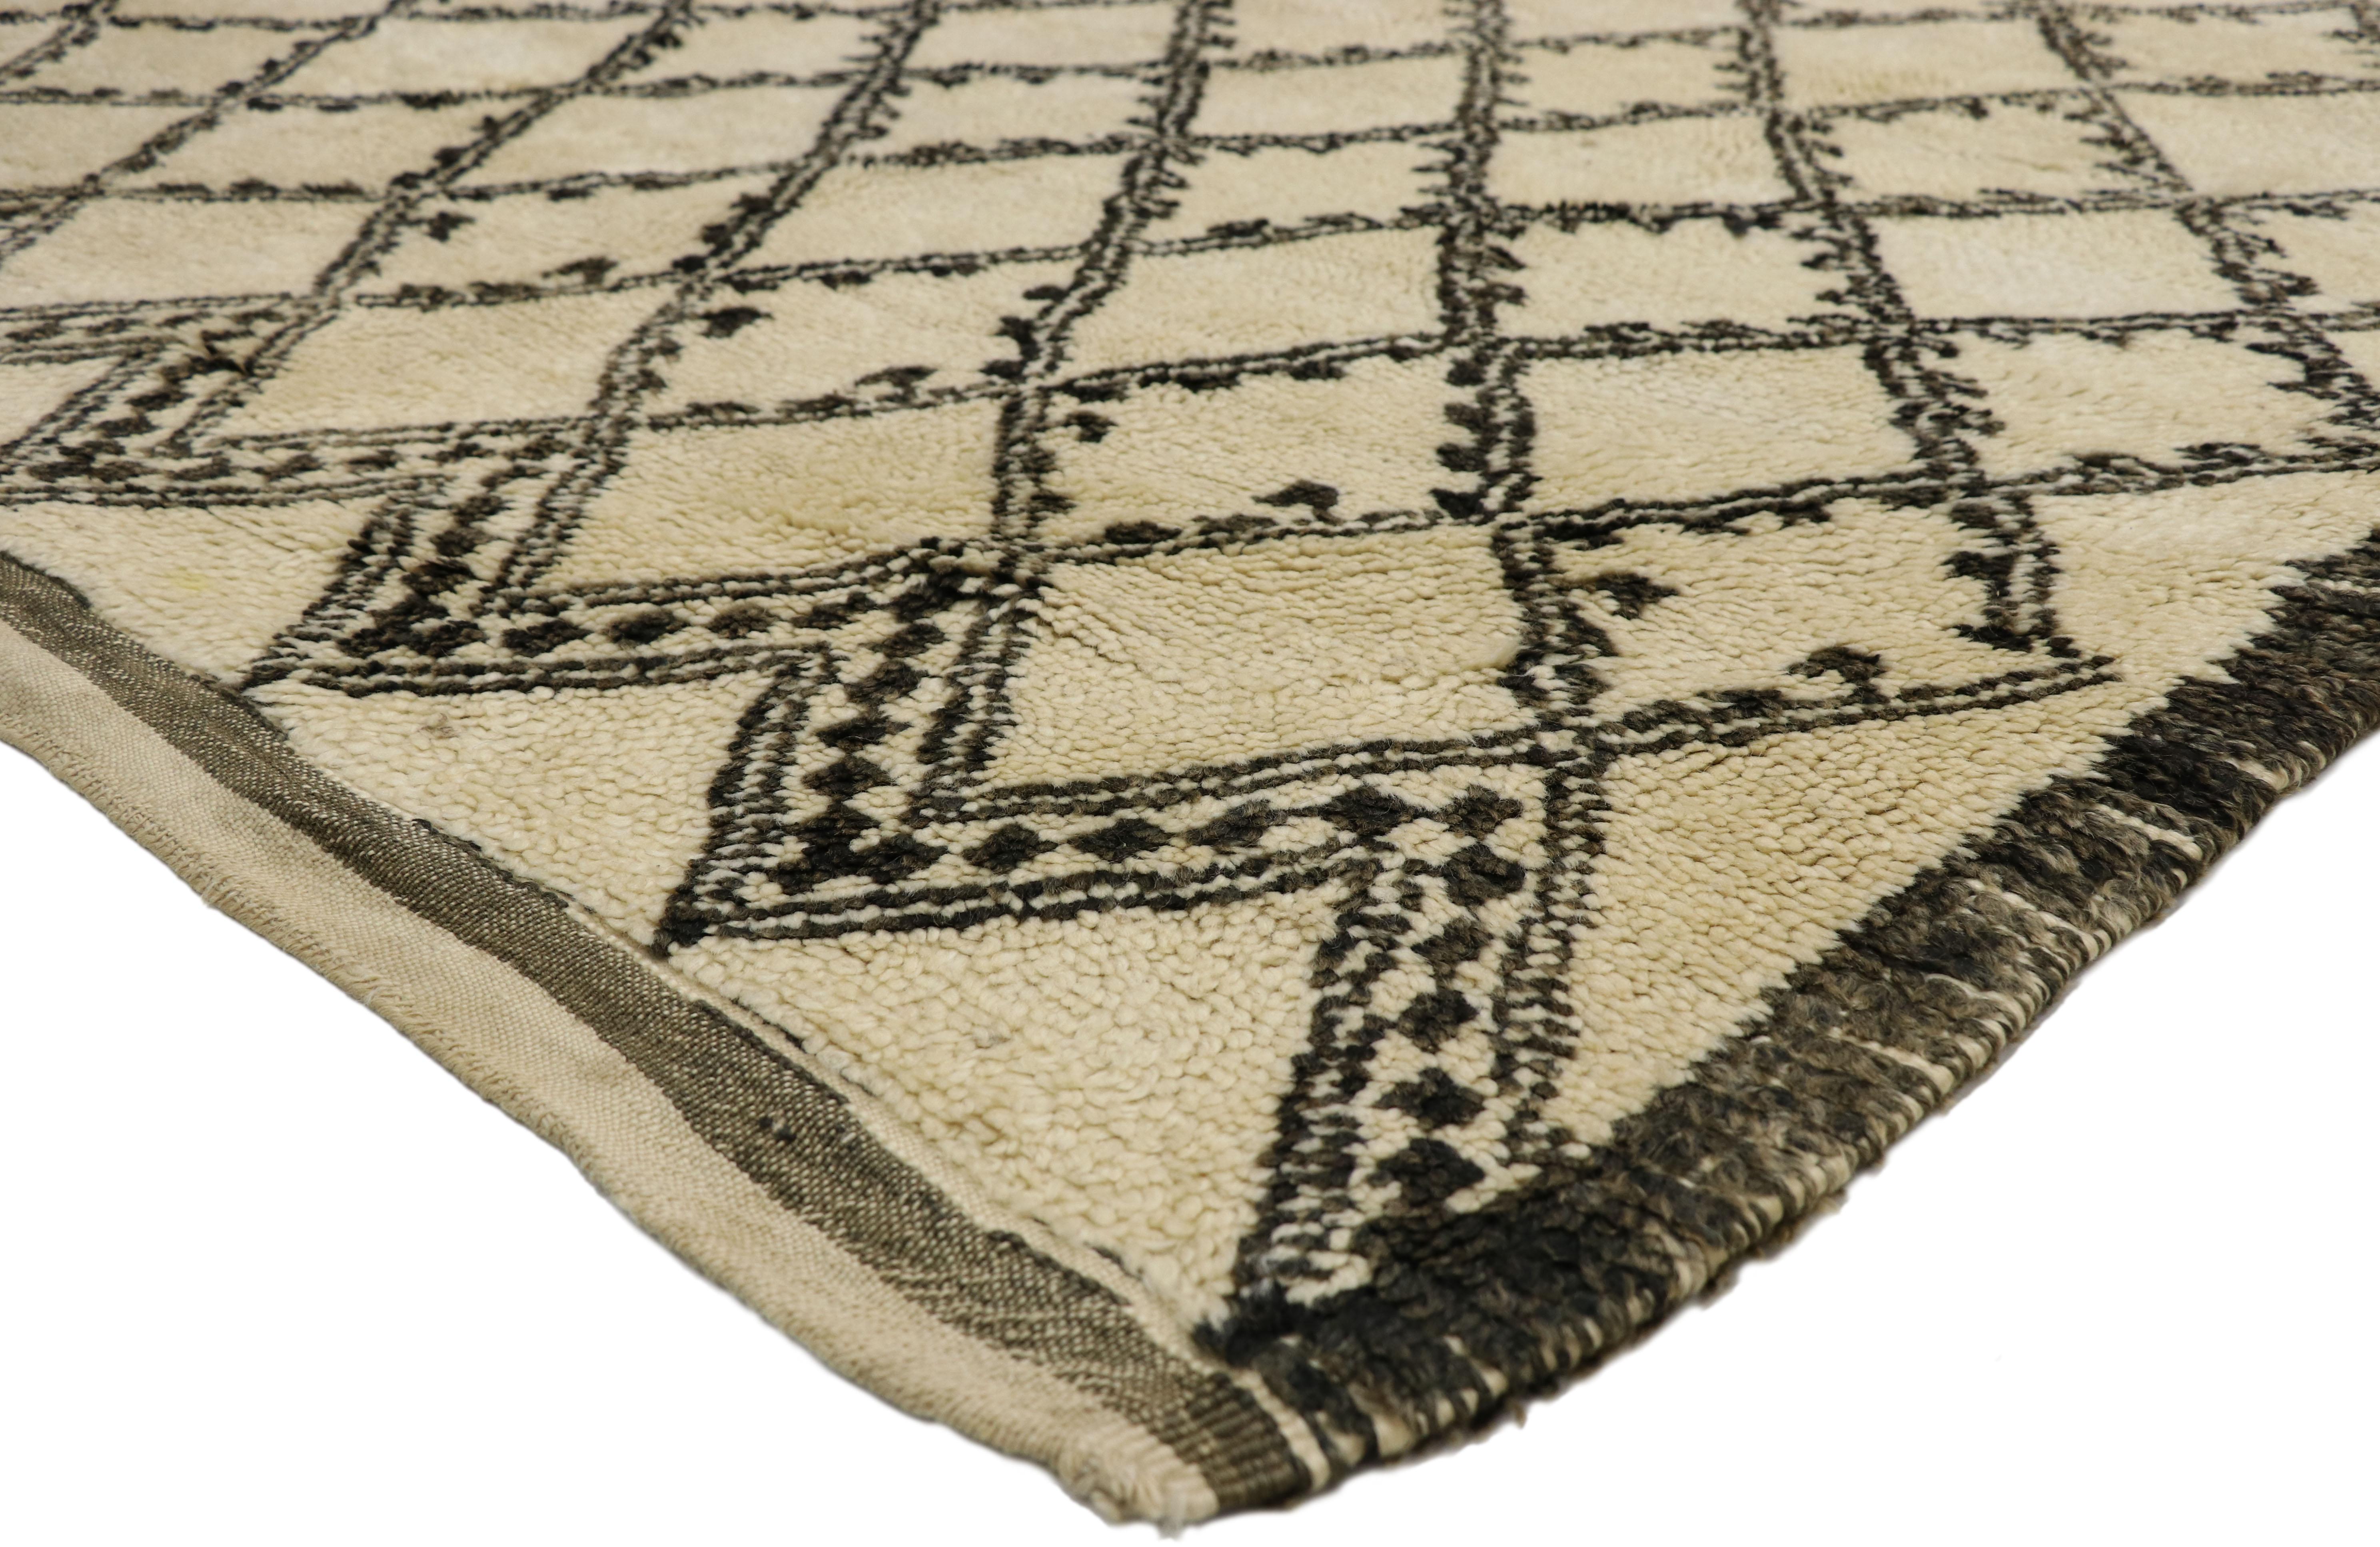 20893, vintage Beni Ourain rug, Berber Moroccan rug with Mid-Century Modern style. This hand knotted wool Beni Ourain Moroccan rug features a lozenge trellis pattern on a neutral background. Bold, thick lines form a two different variations of a